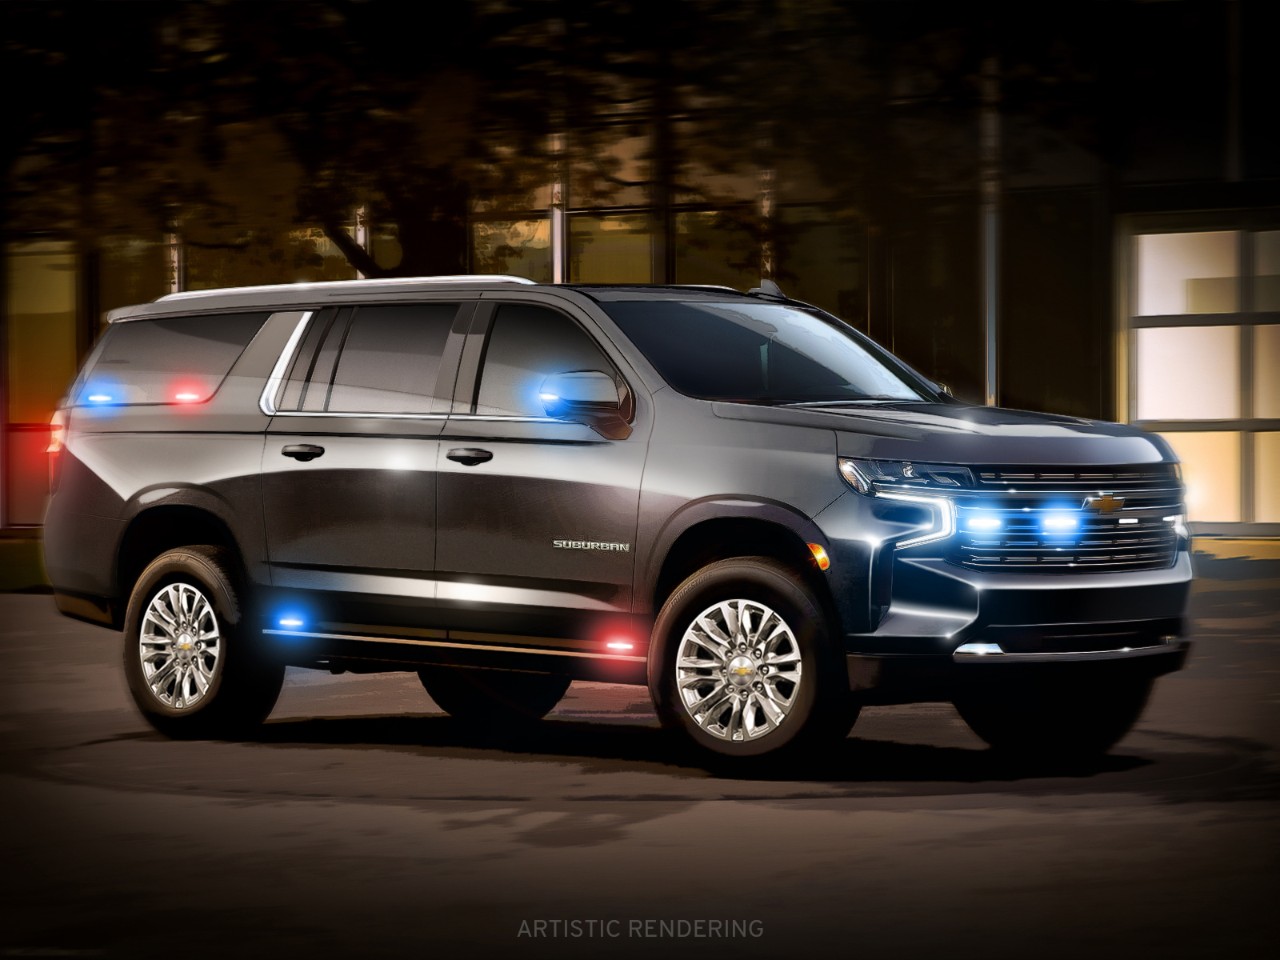 An artist rendering of a dark Chevy Suburban with red and blue lights.